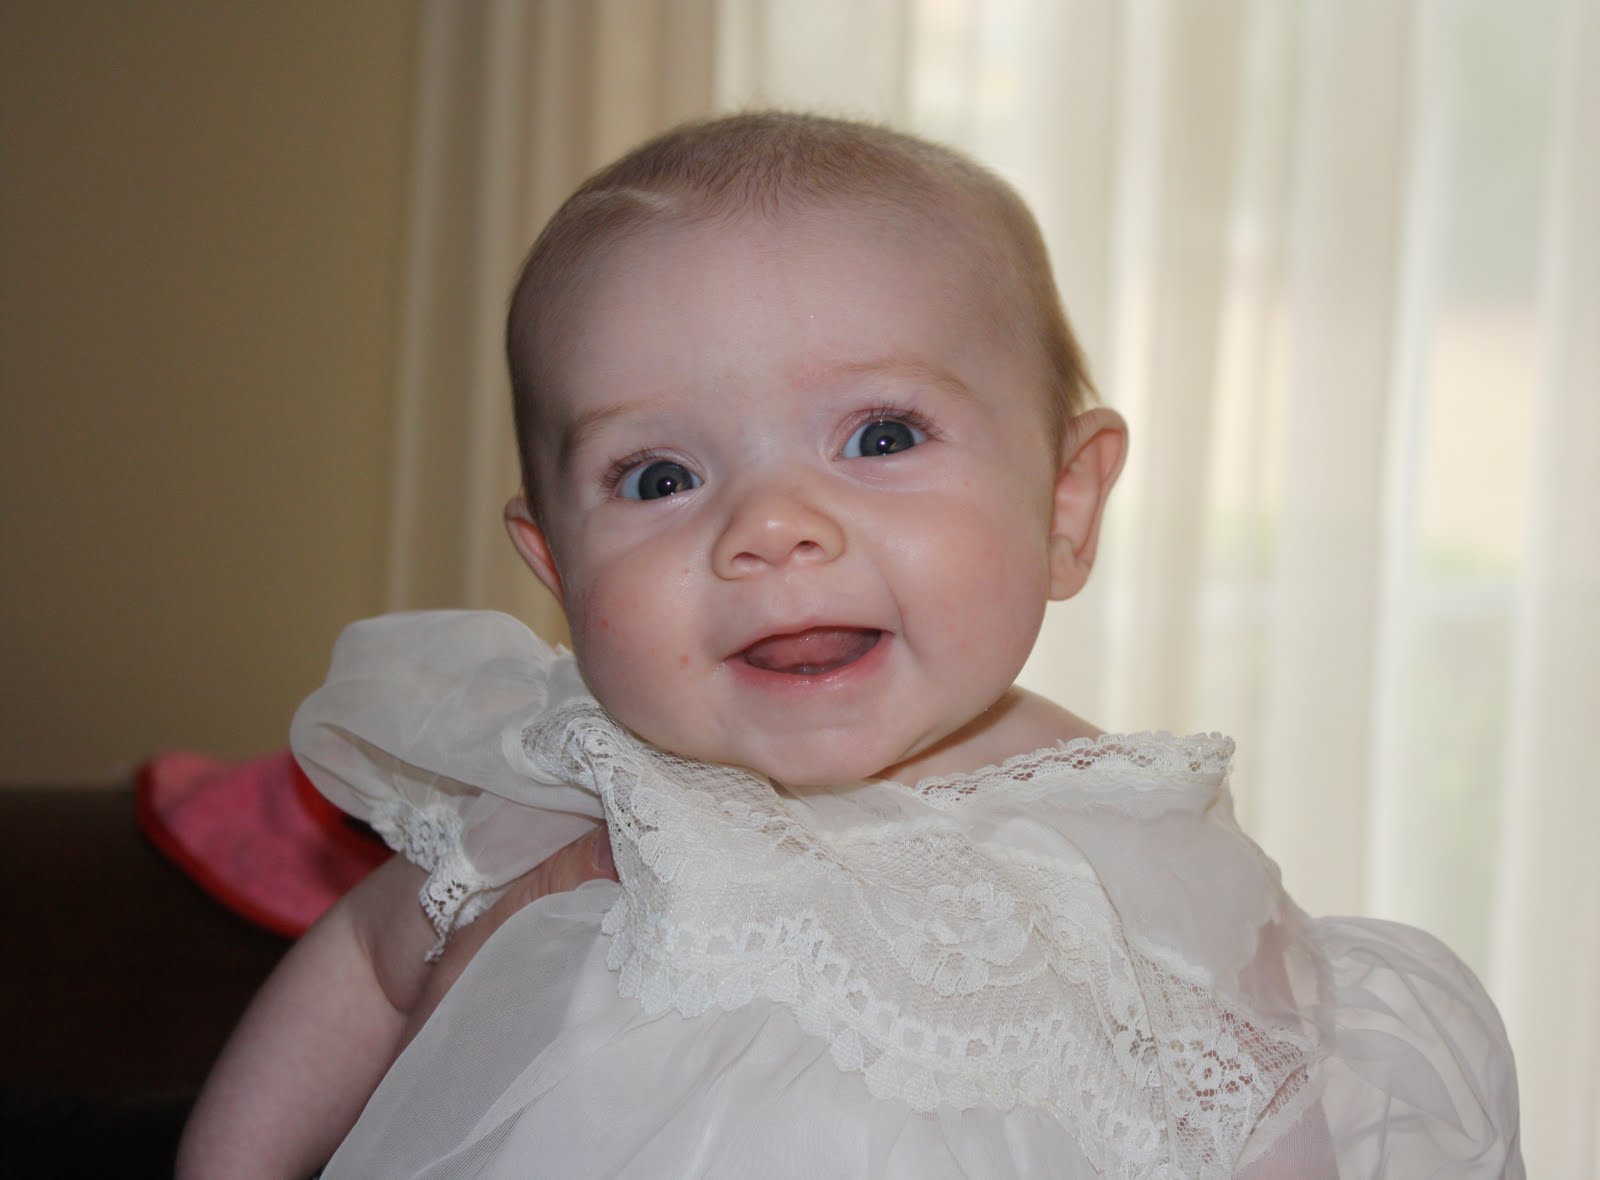 The Johnson Family: A toothless grin and Baby dedication...